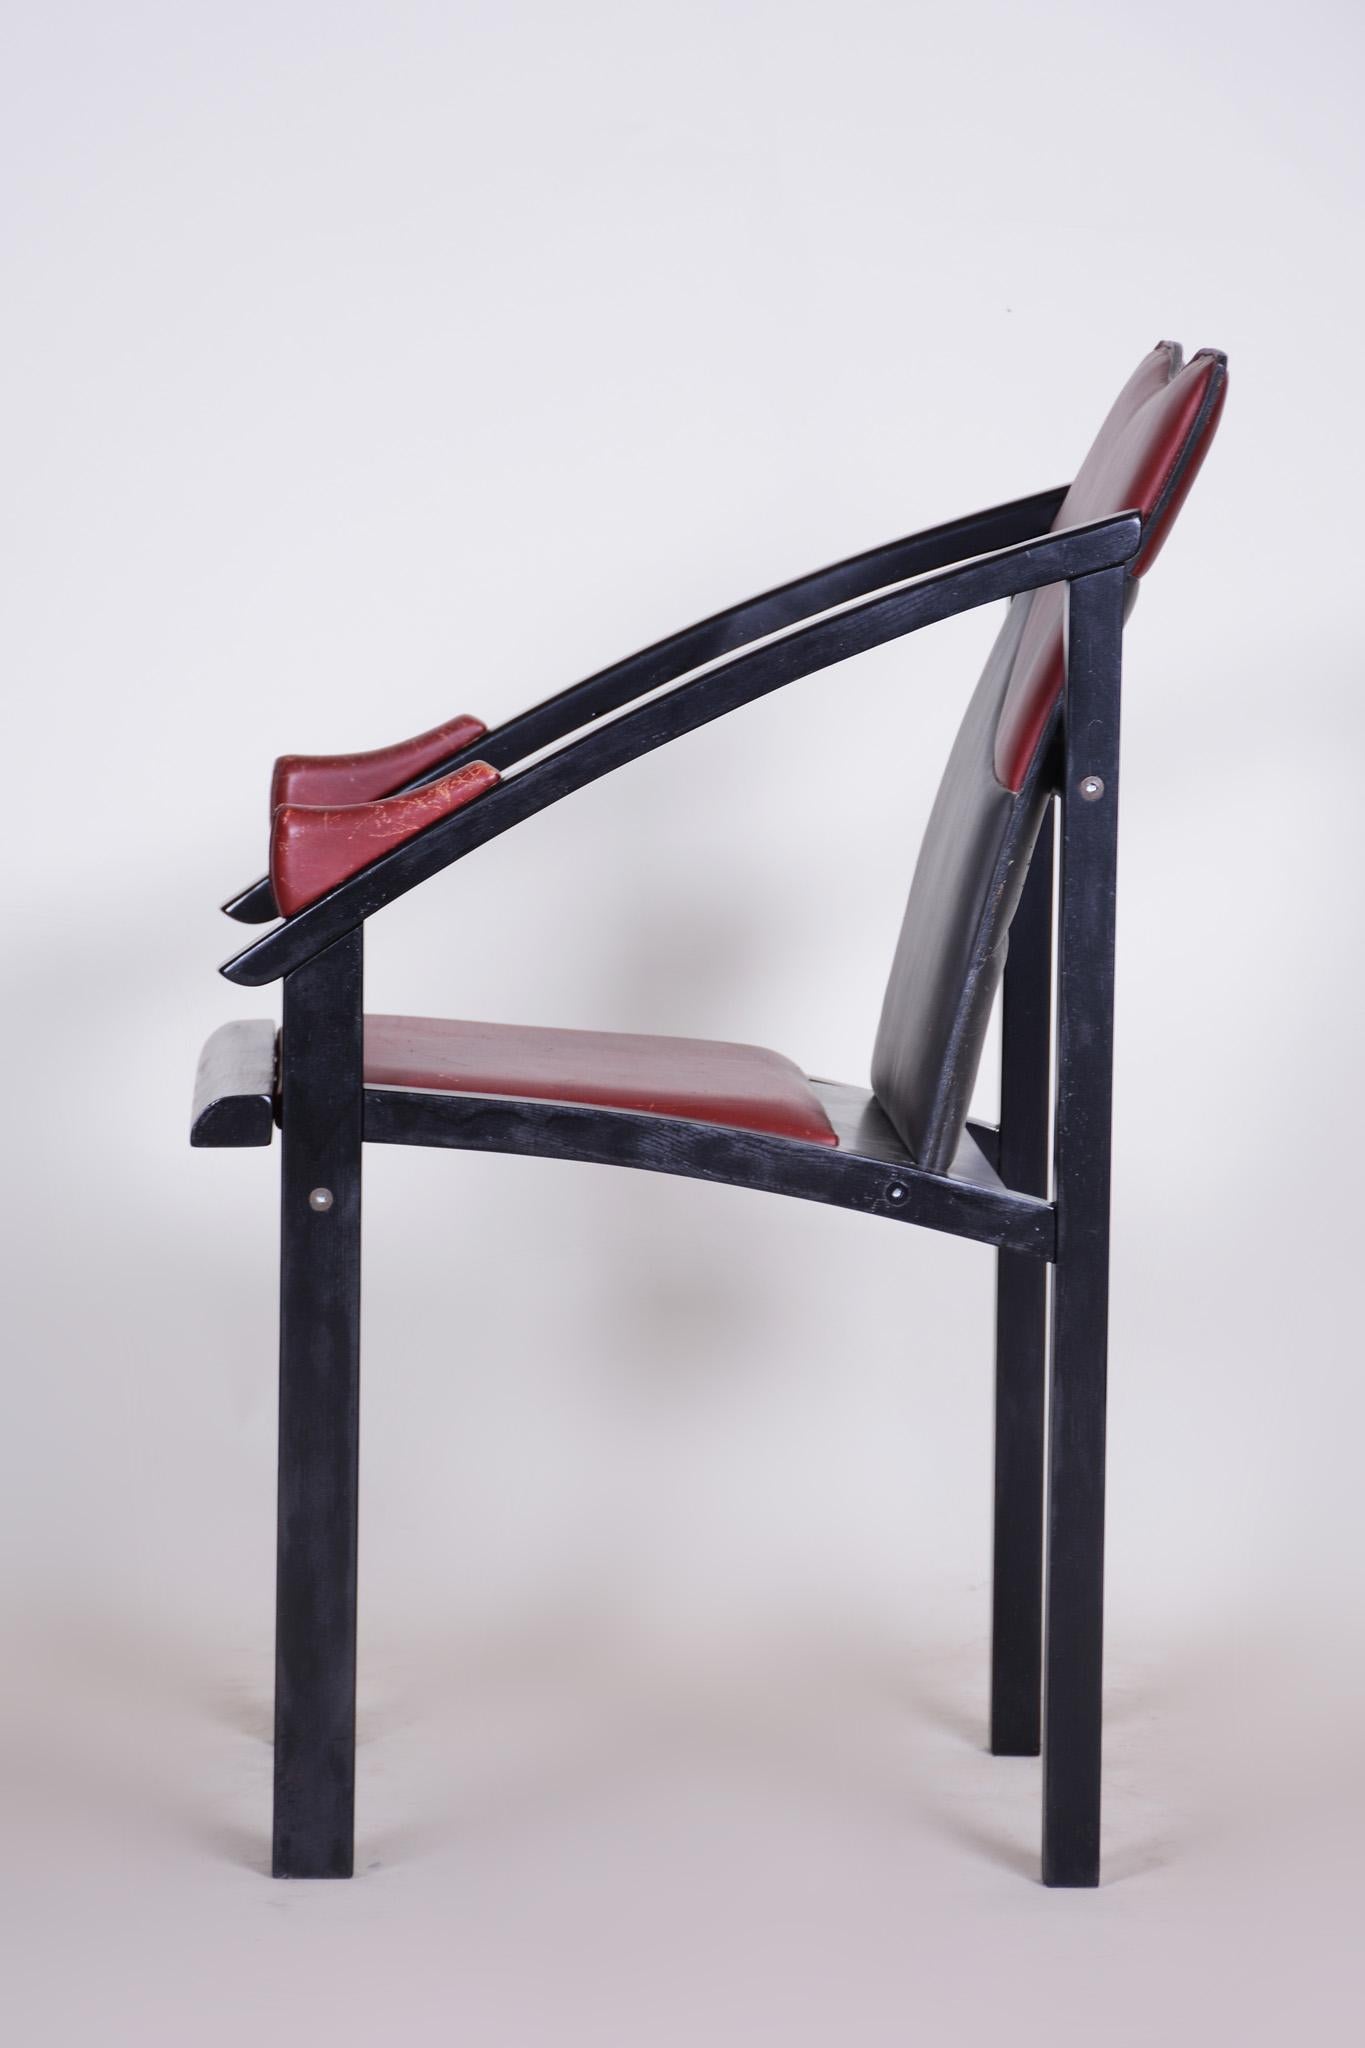 1970s Armchair Made in Europe, Made Out of Lacquered Wood and Leather, Original For Sale 1